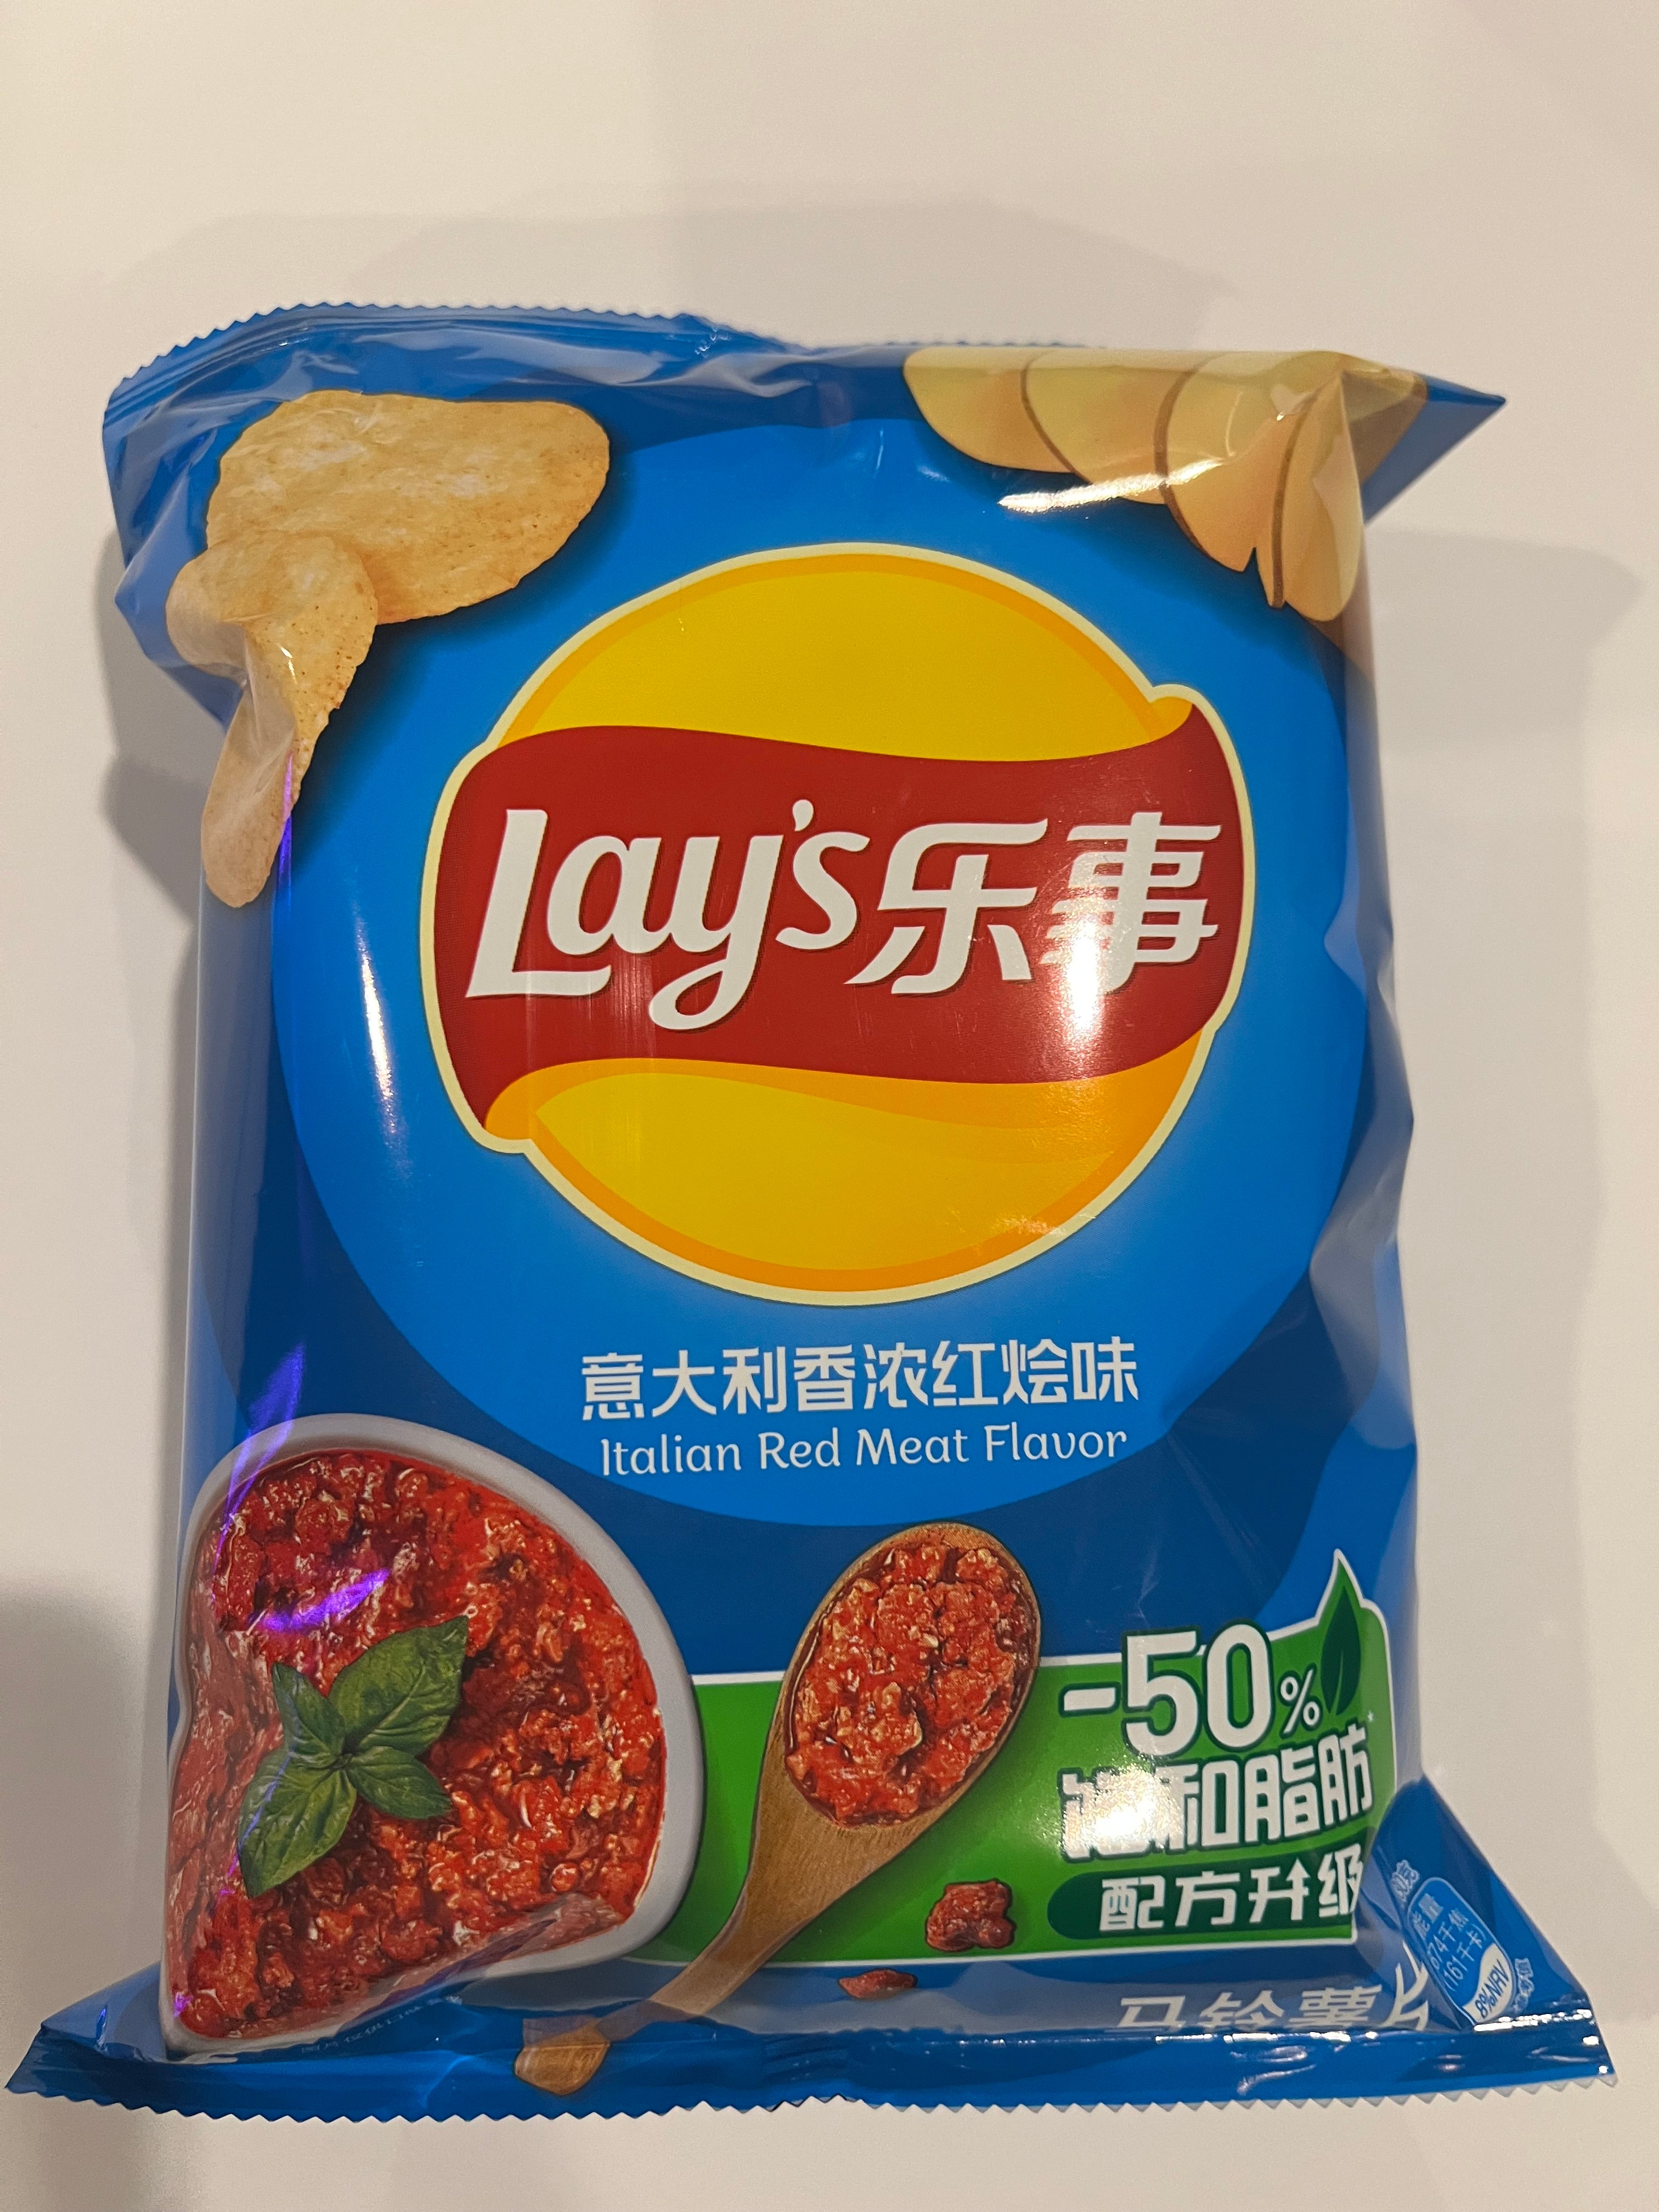 Lay's Italian red meat flavor